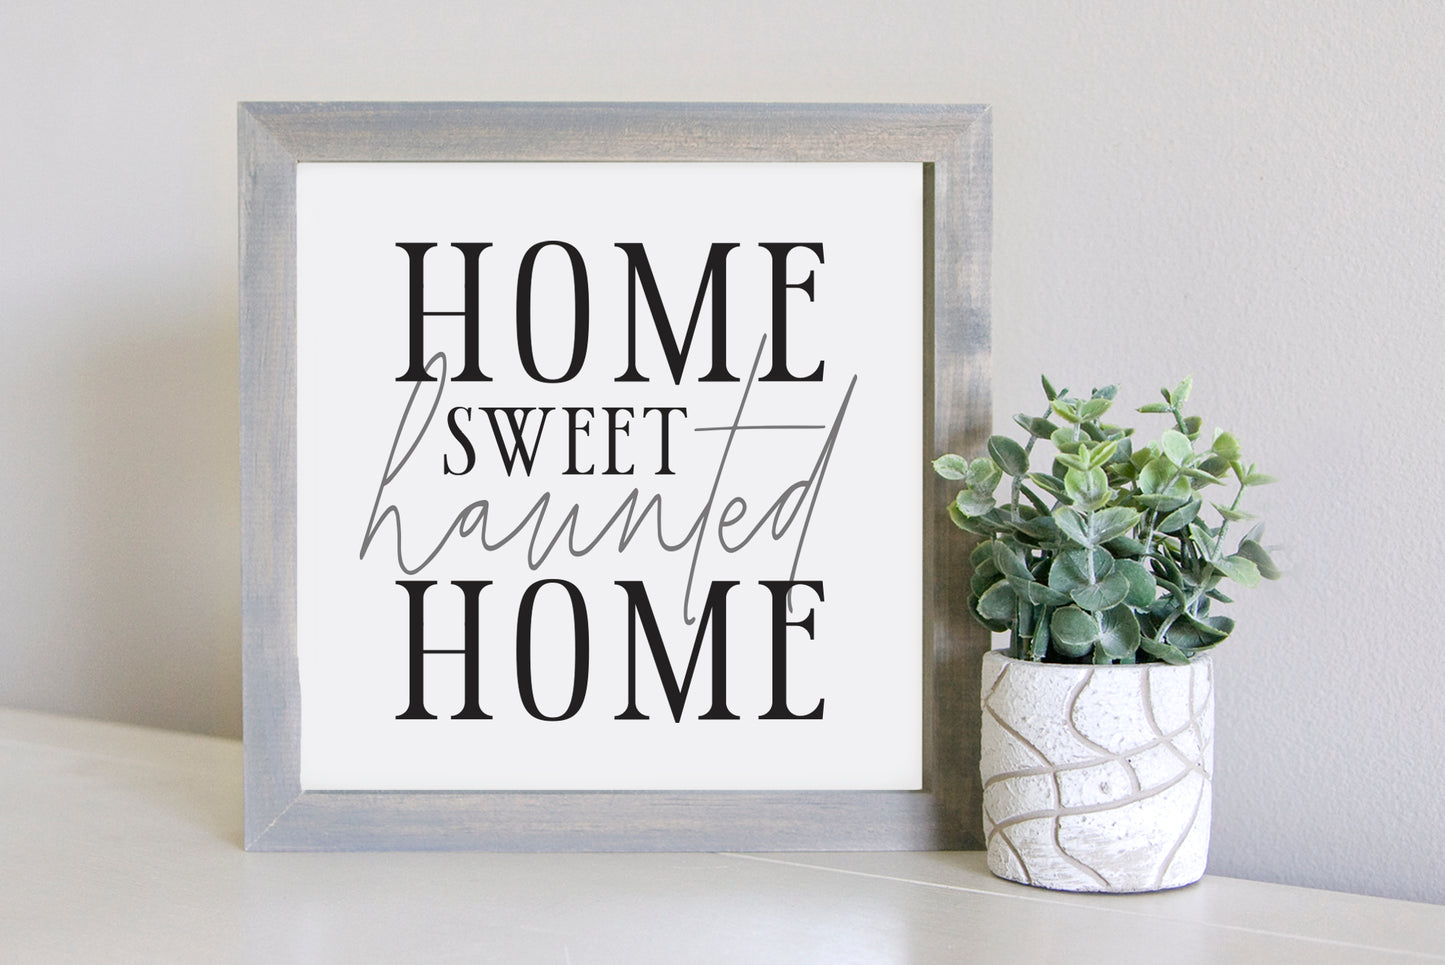 SLIGHTLY FLAWED Medium Size Sign Insert: Home Sweet Haunted Home (Halloween) | Magnetic Sign INSERT ONLY